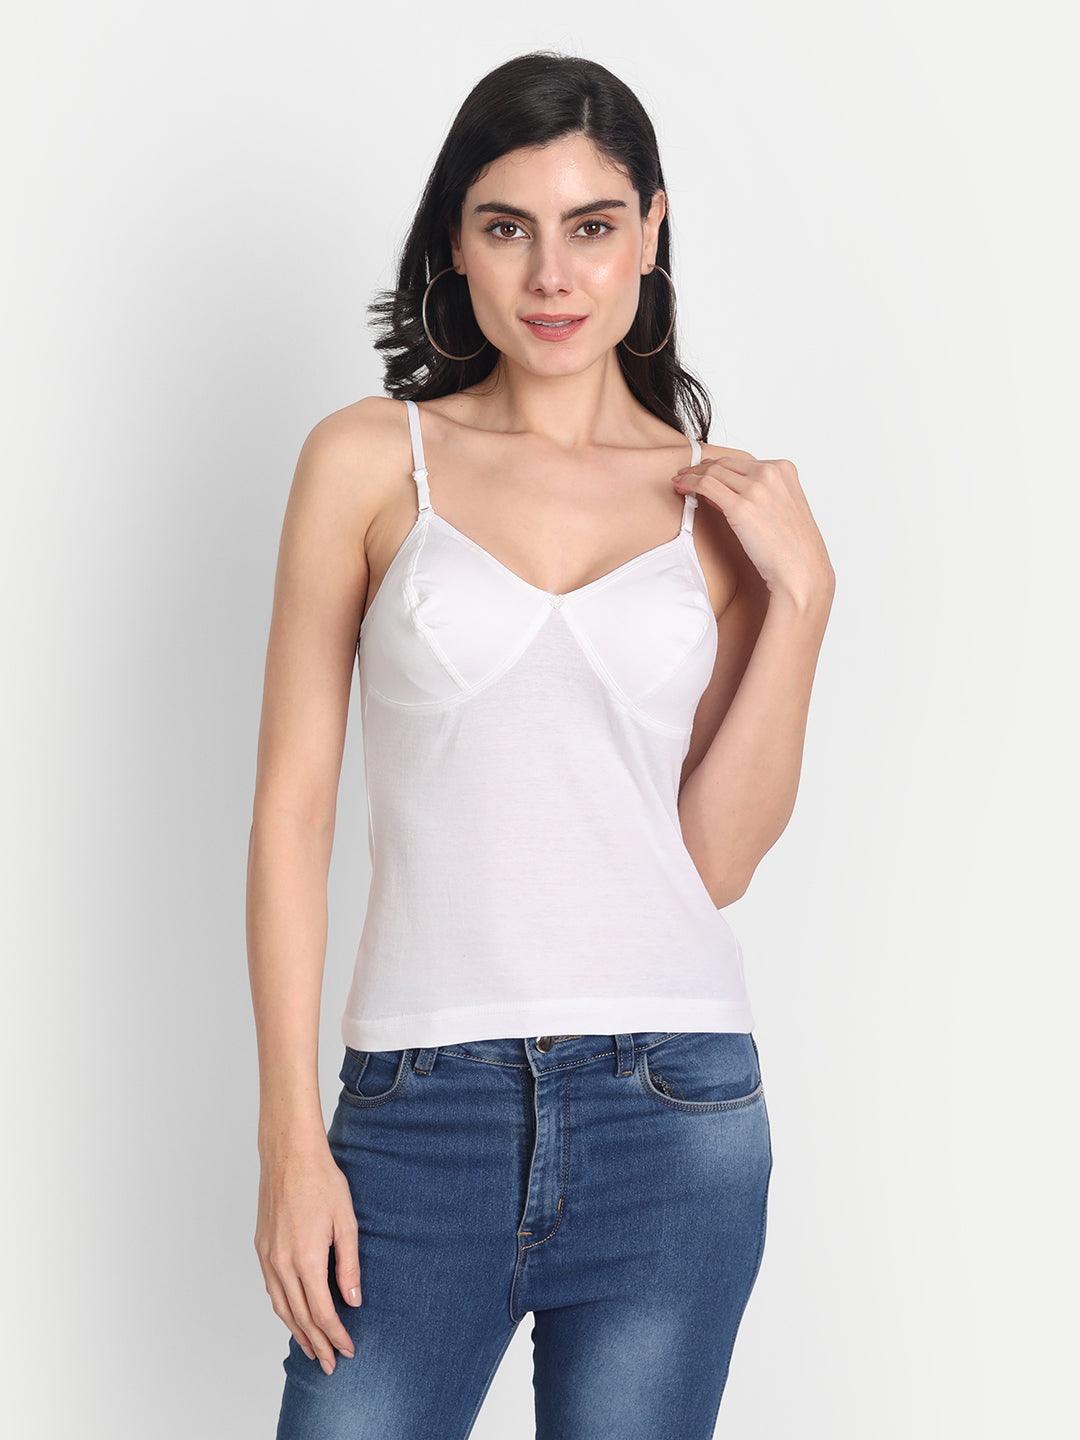 Women's Cotton Camisole with Built in Bra Adjustable Strap Square